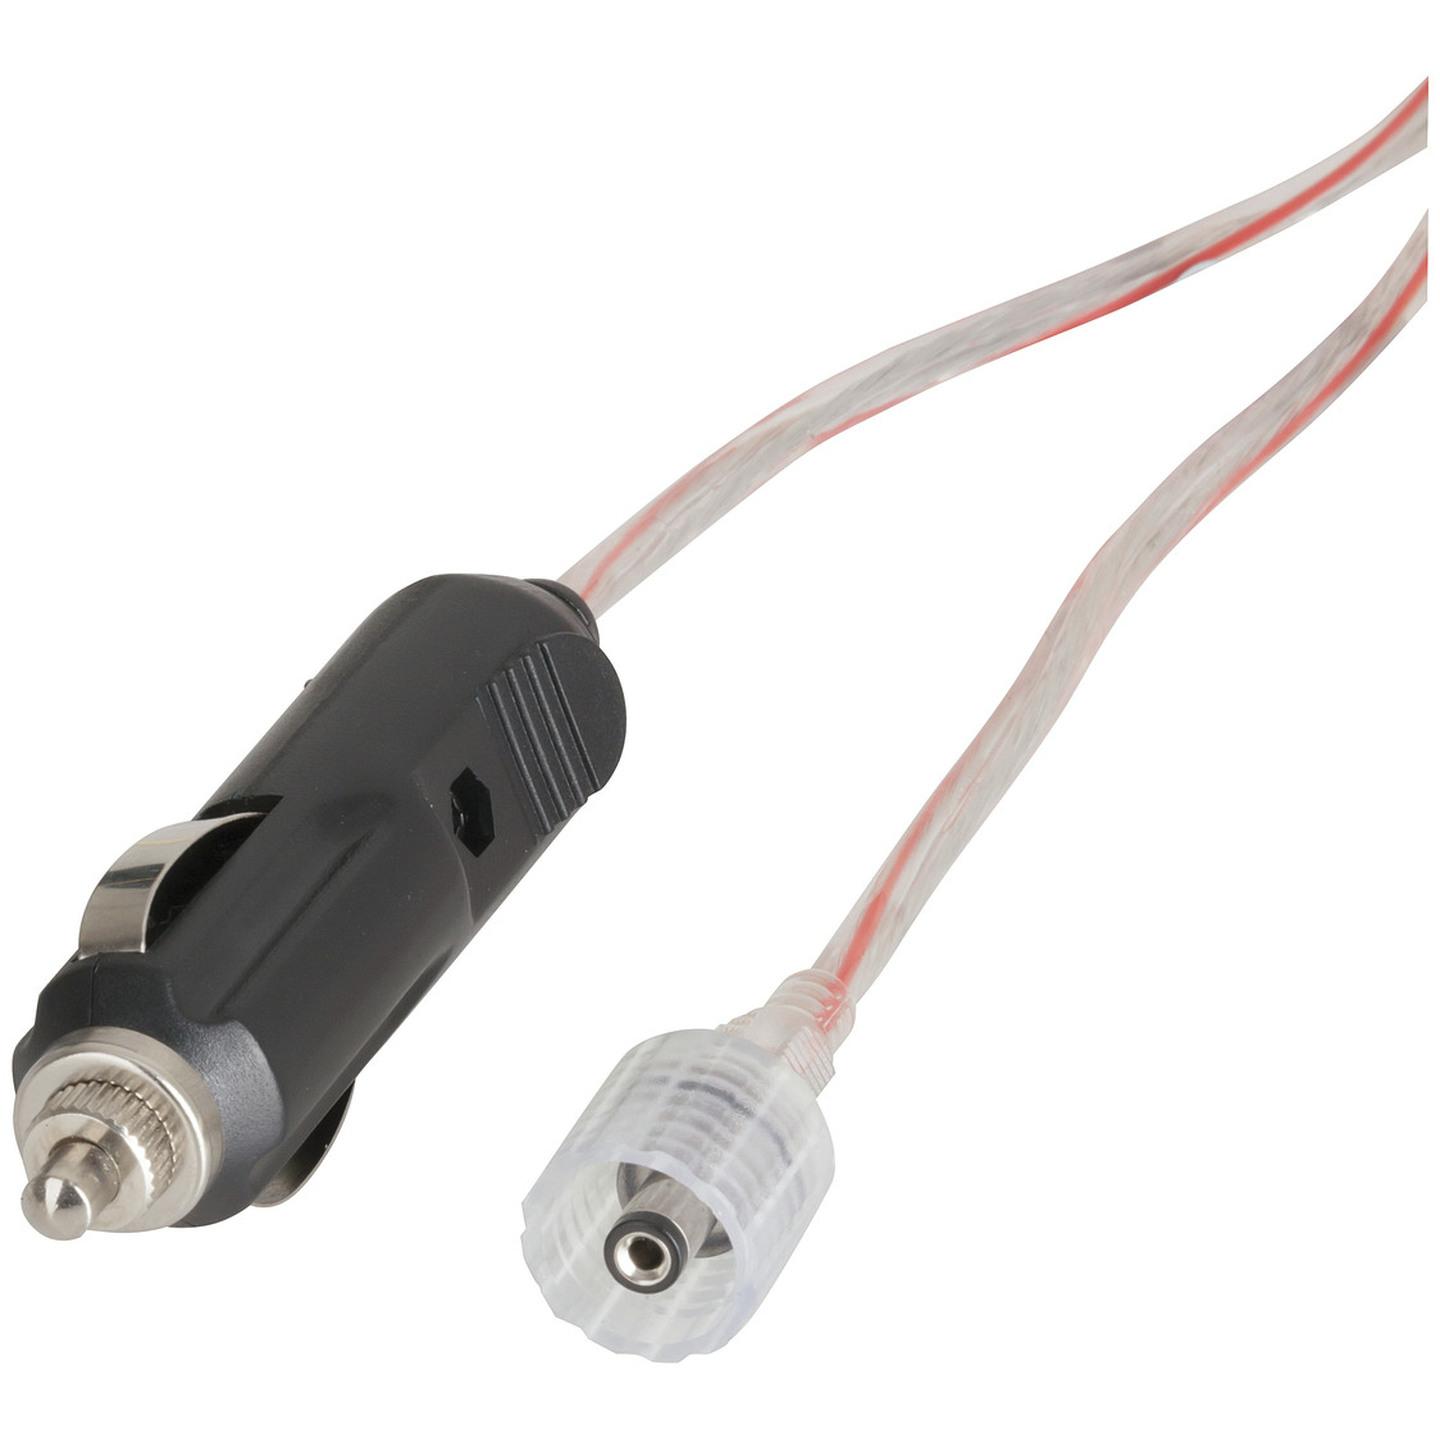 12V Power Cable with IP67 2.1mm DC Plug to suit ZD0579